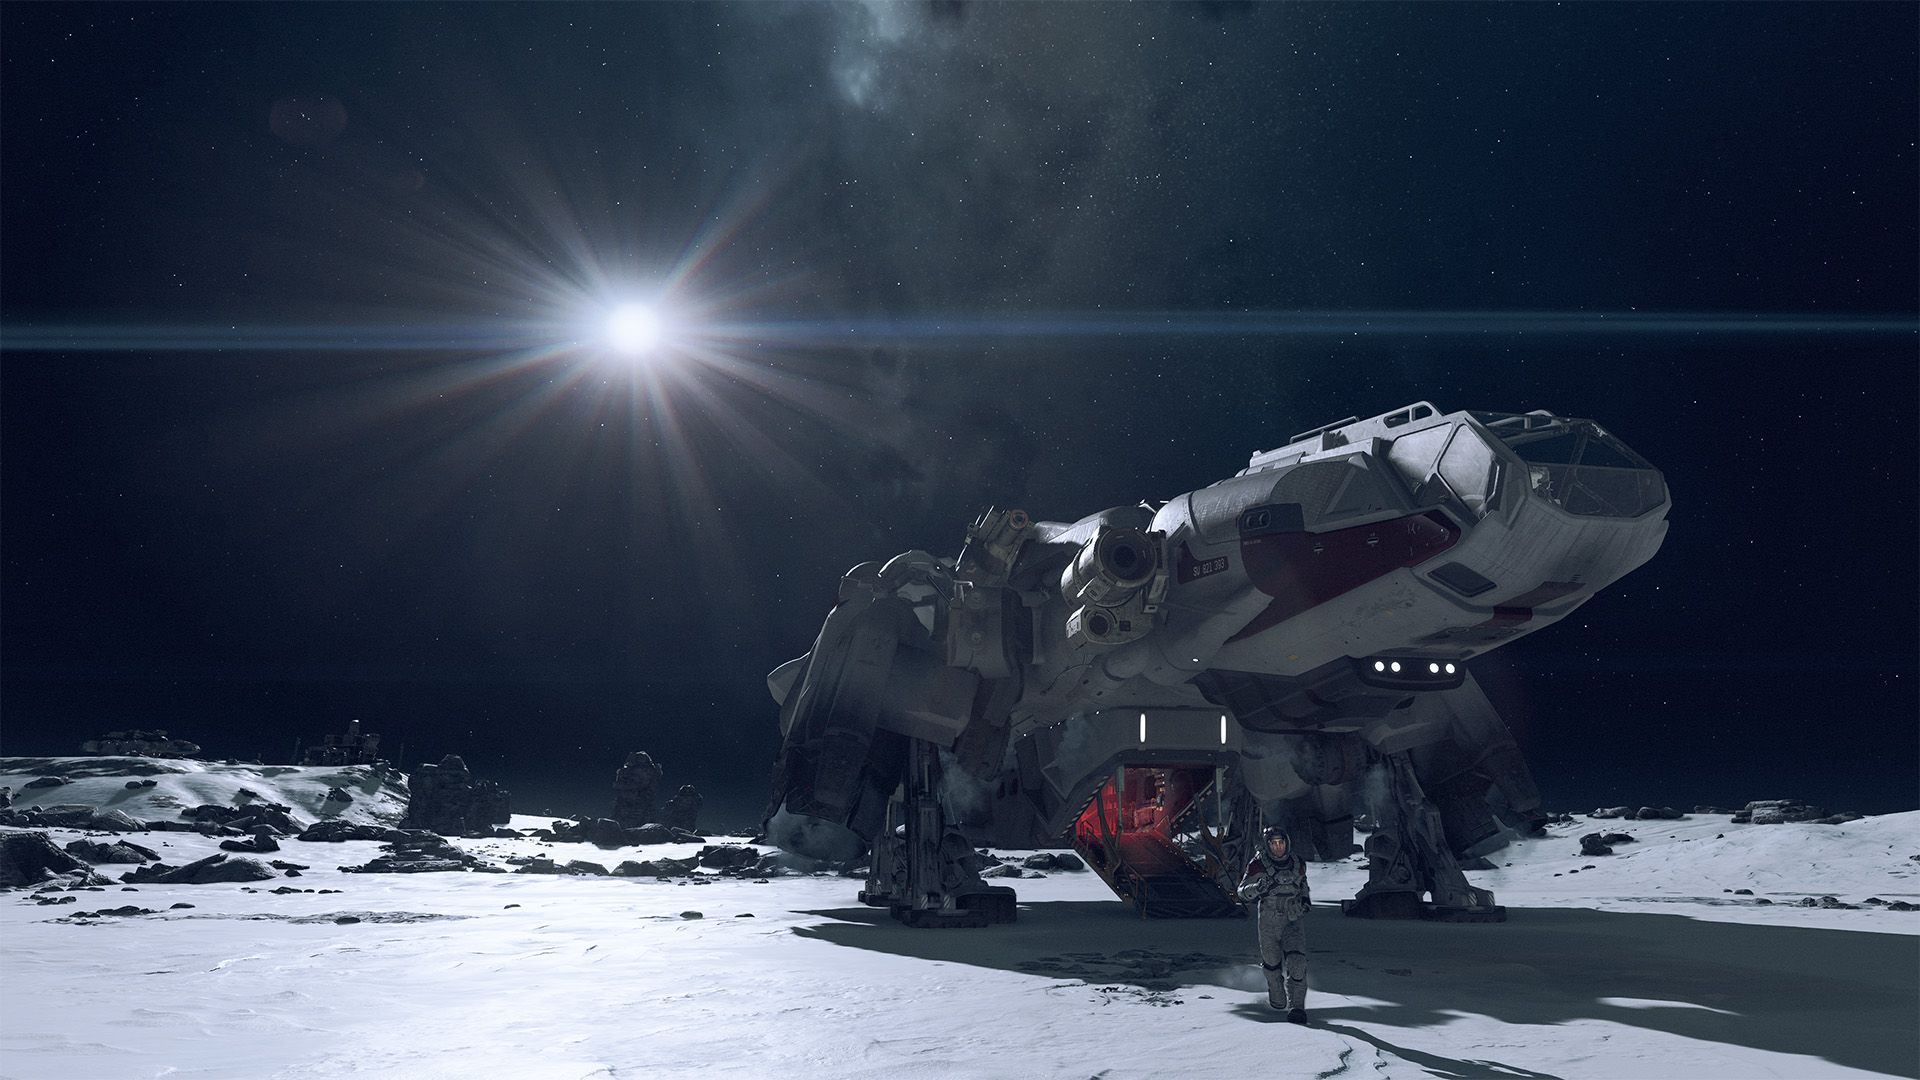 A ship and astronaut on an icy planet backlit by a brilliant sun and black, starry sky.